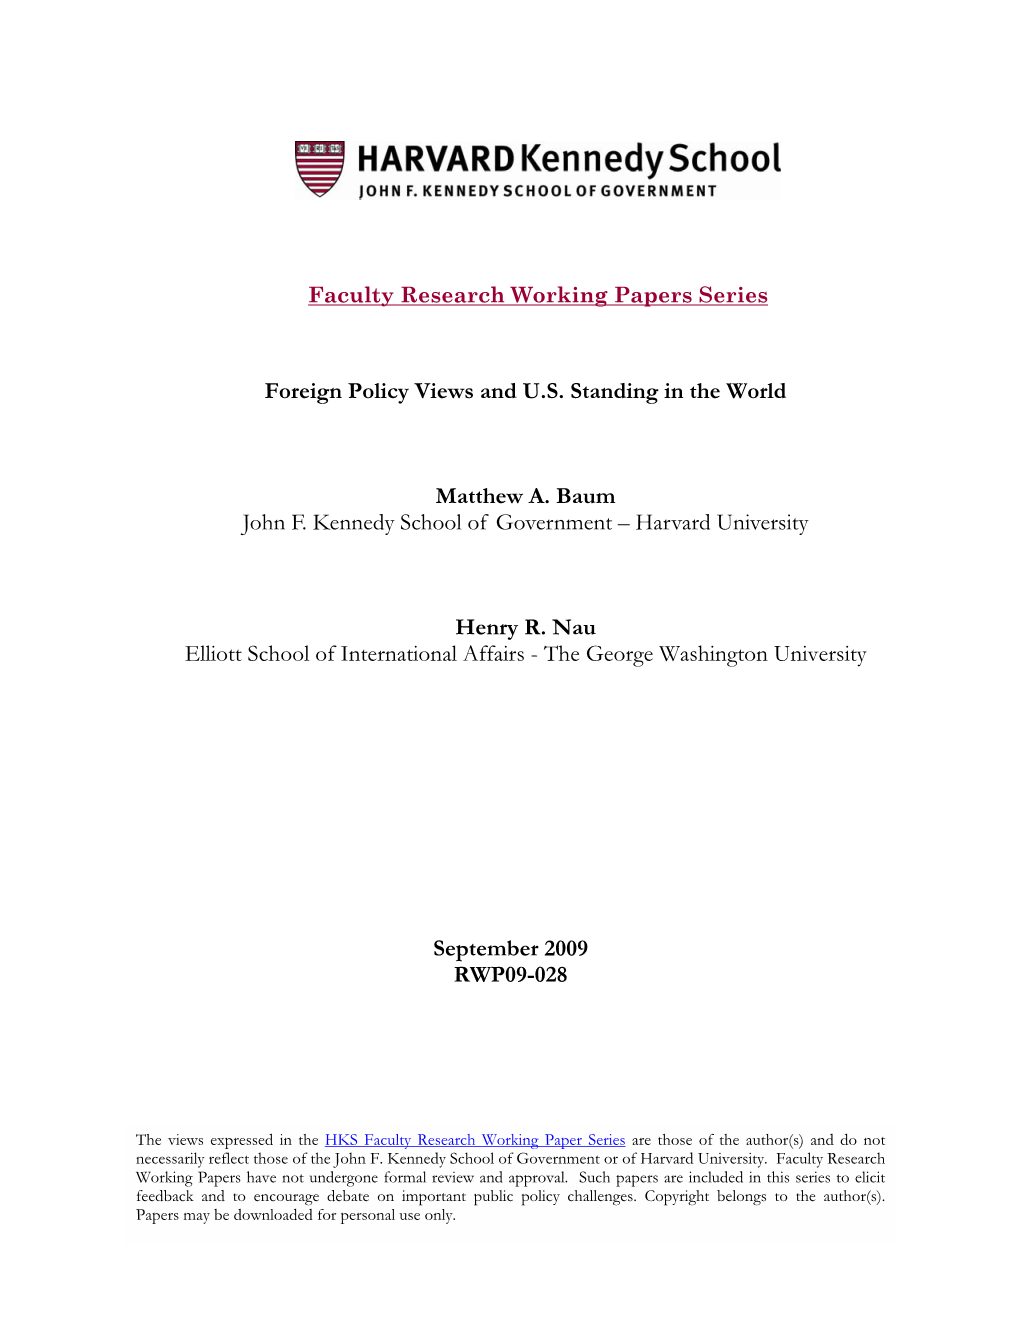 Foreign Policy Views and US Standing in the World Matthew A. Baum John F. Kennedy School of Government